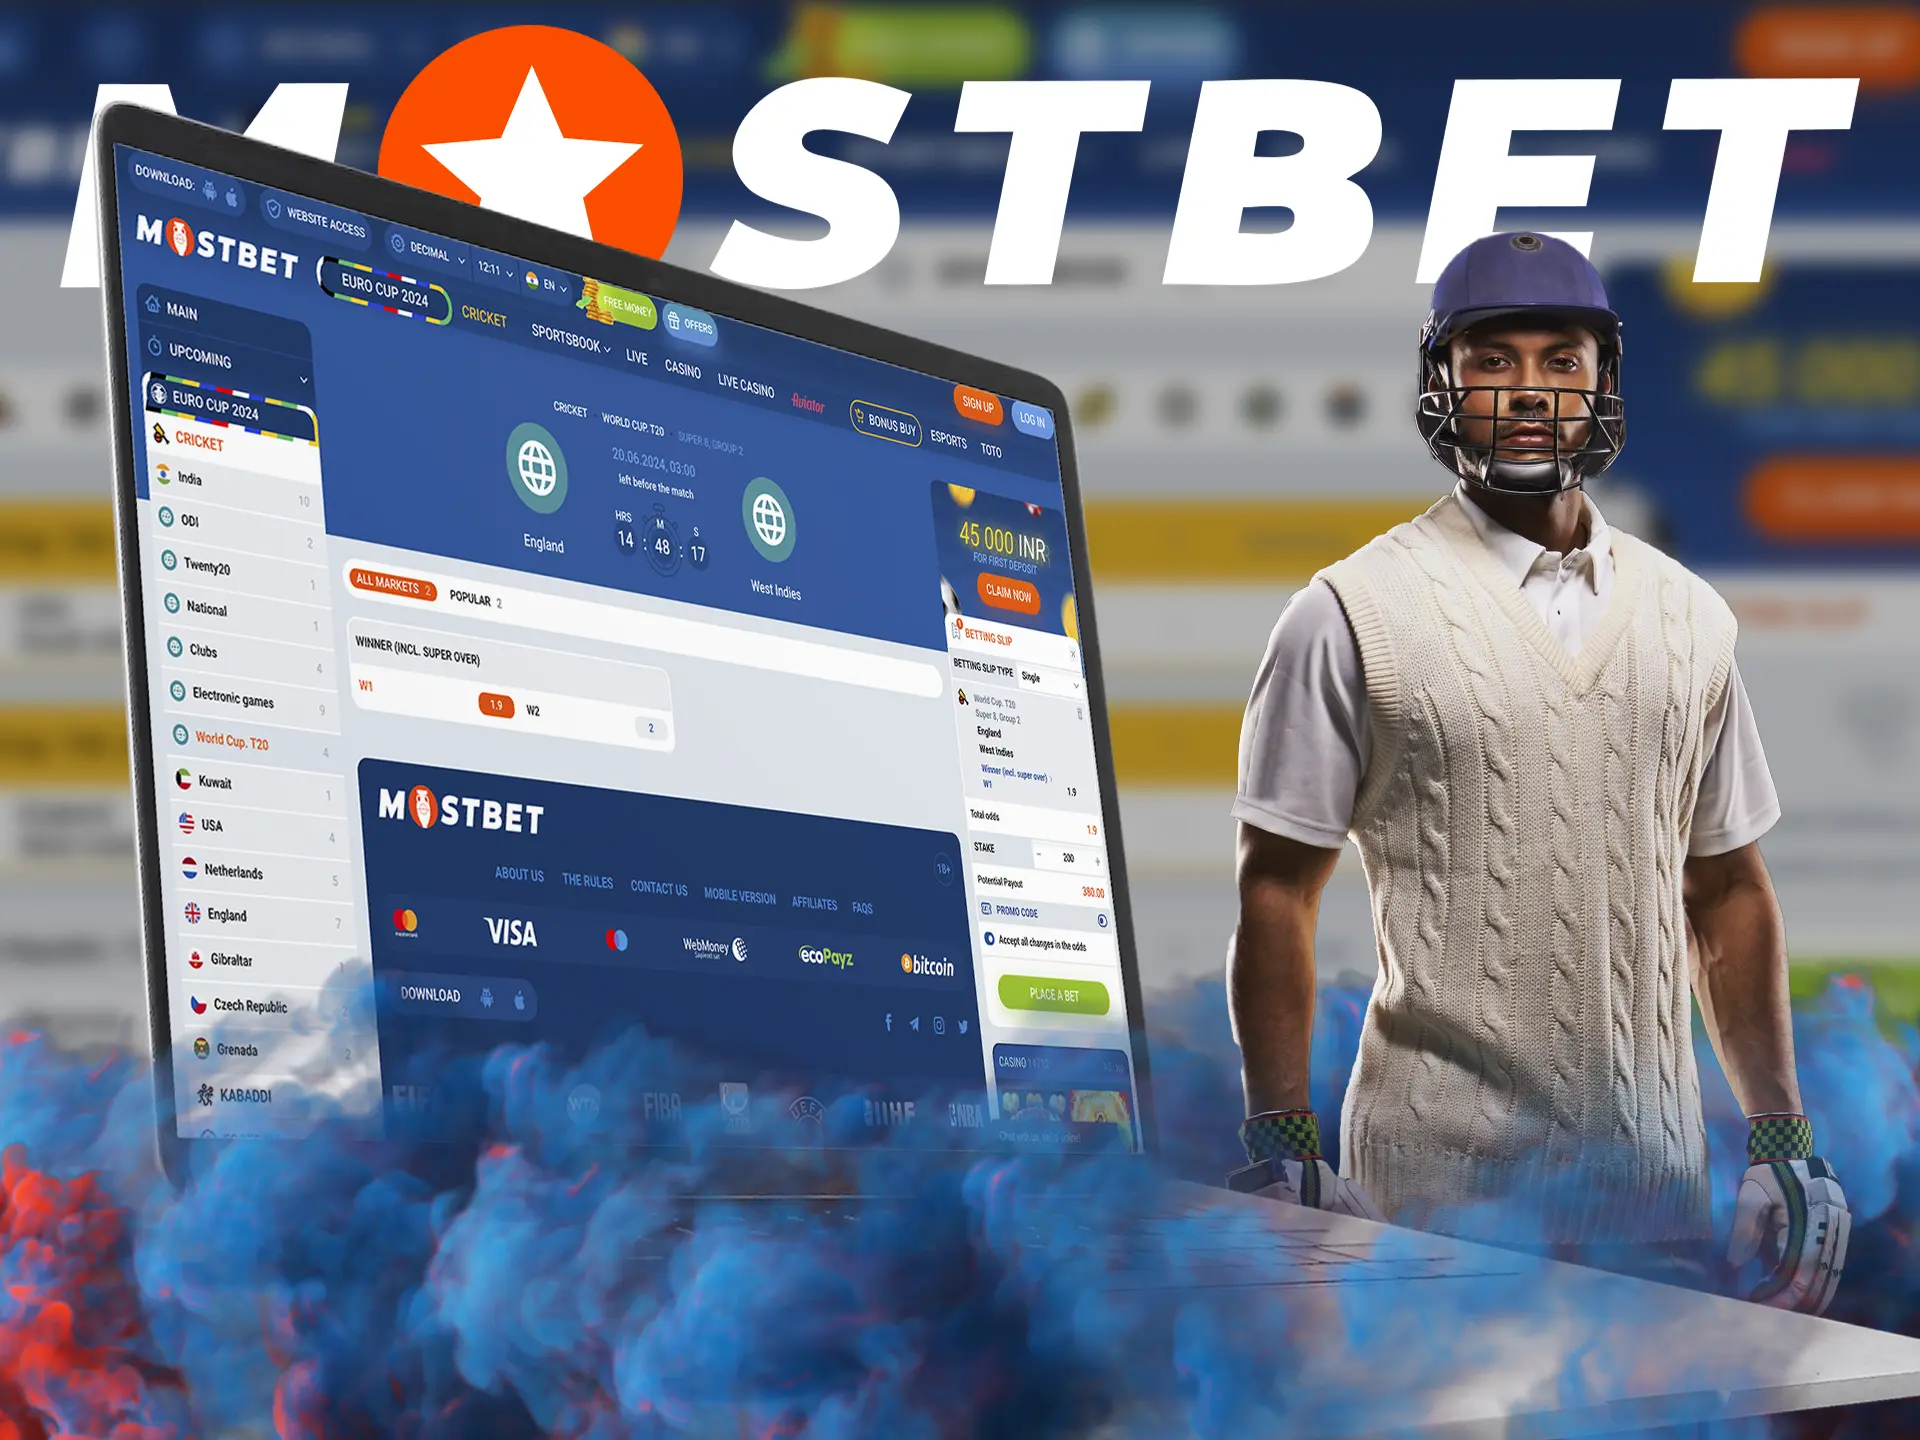 Mostbet is a unique bookmaker in which every cricket fan can get a charge of emotions from winning.